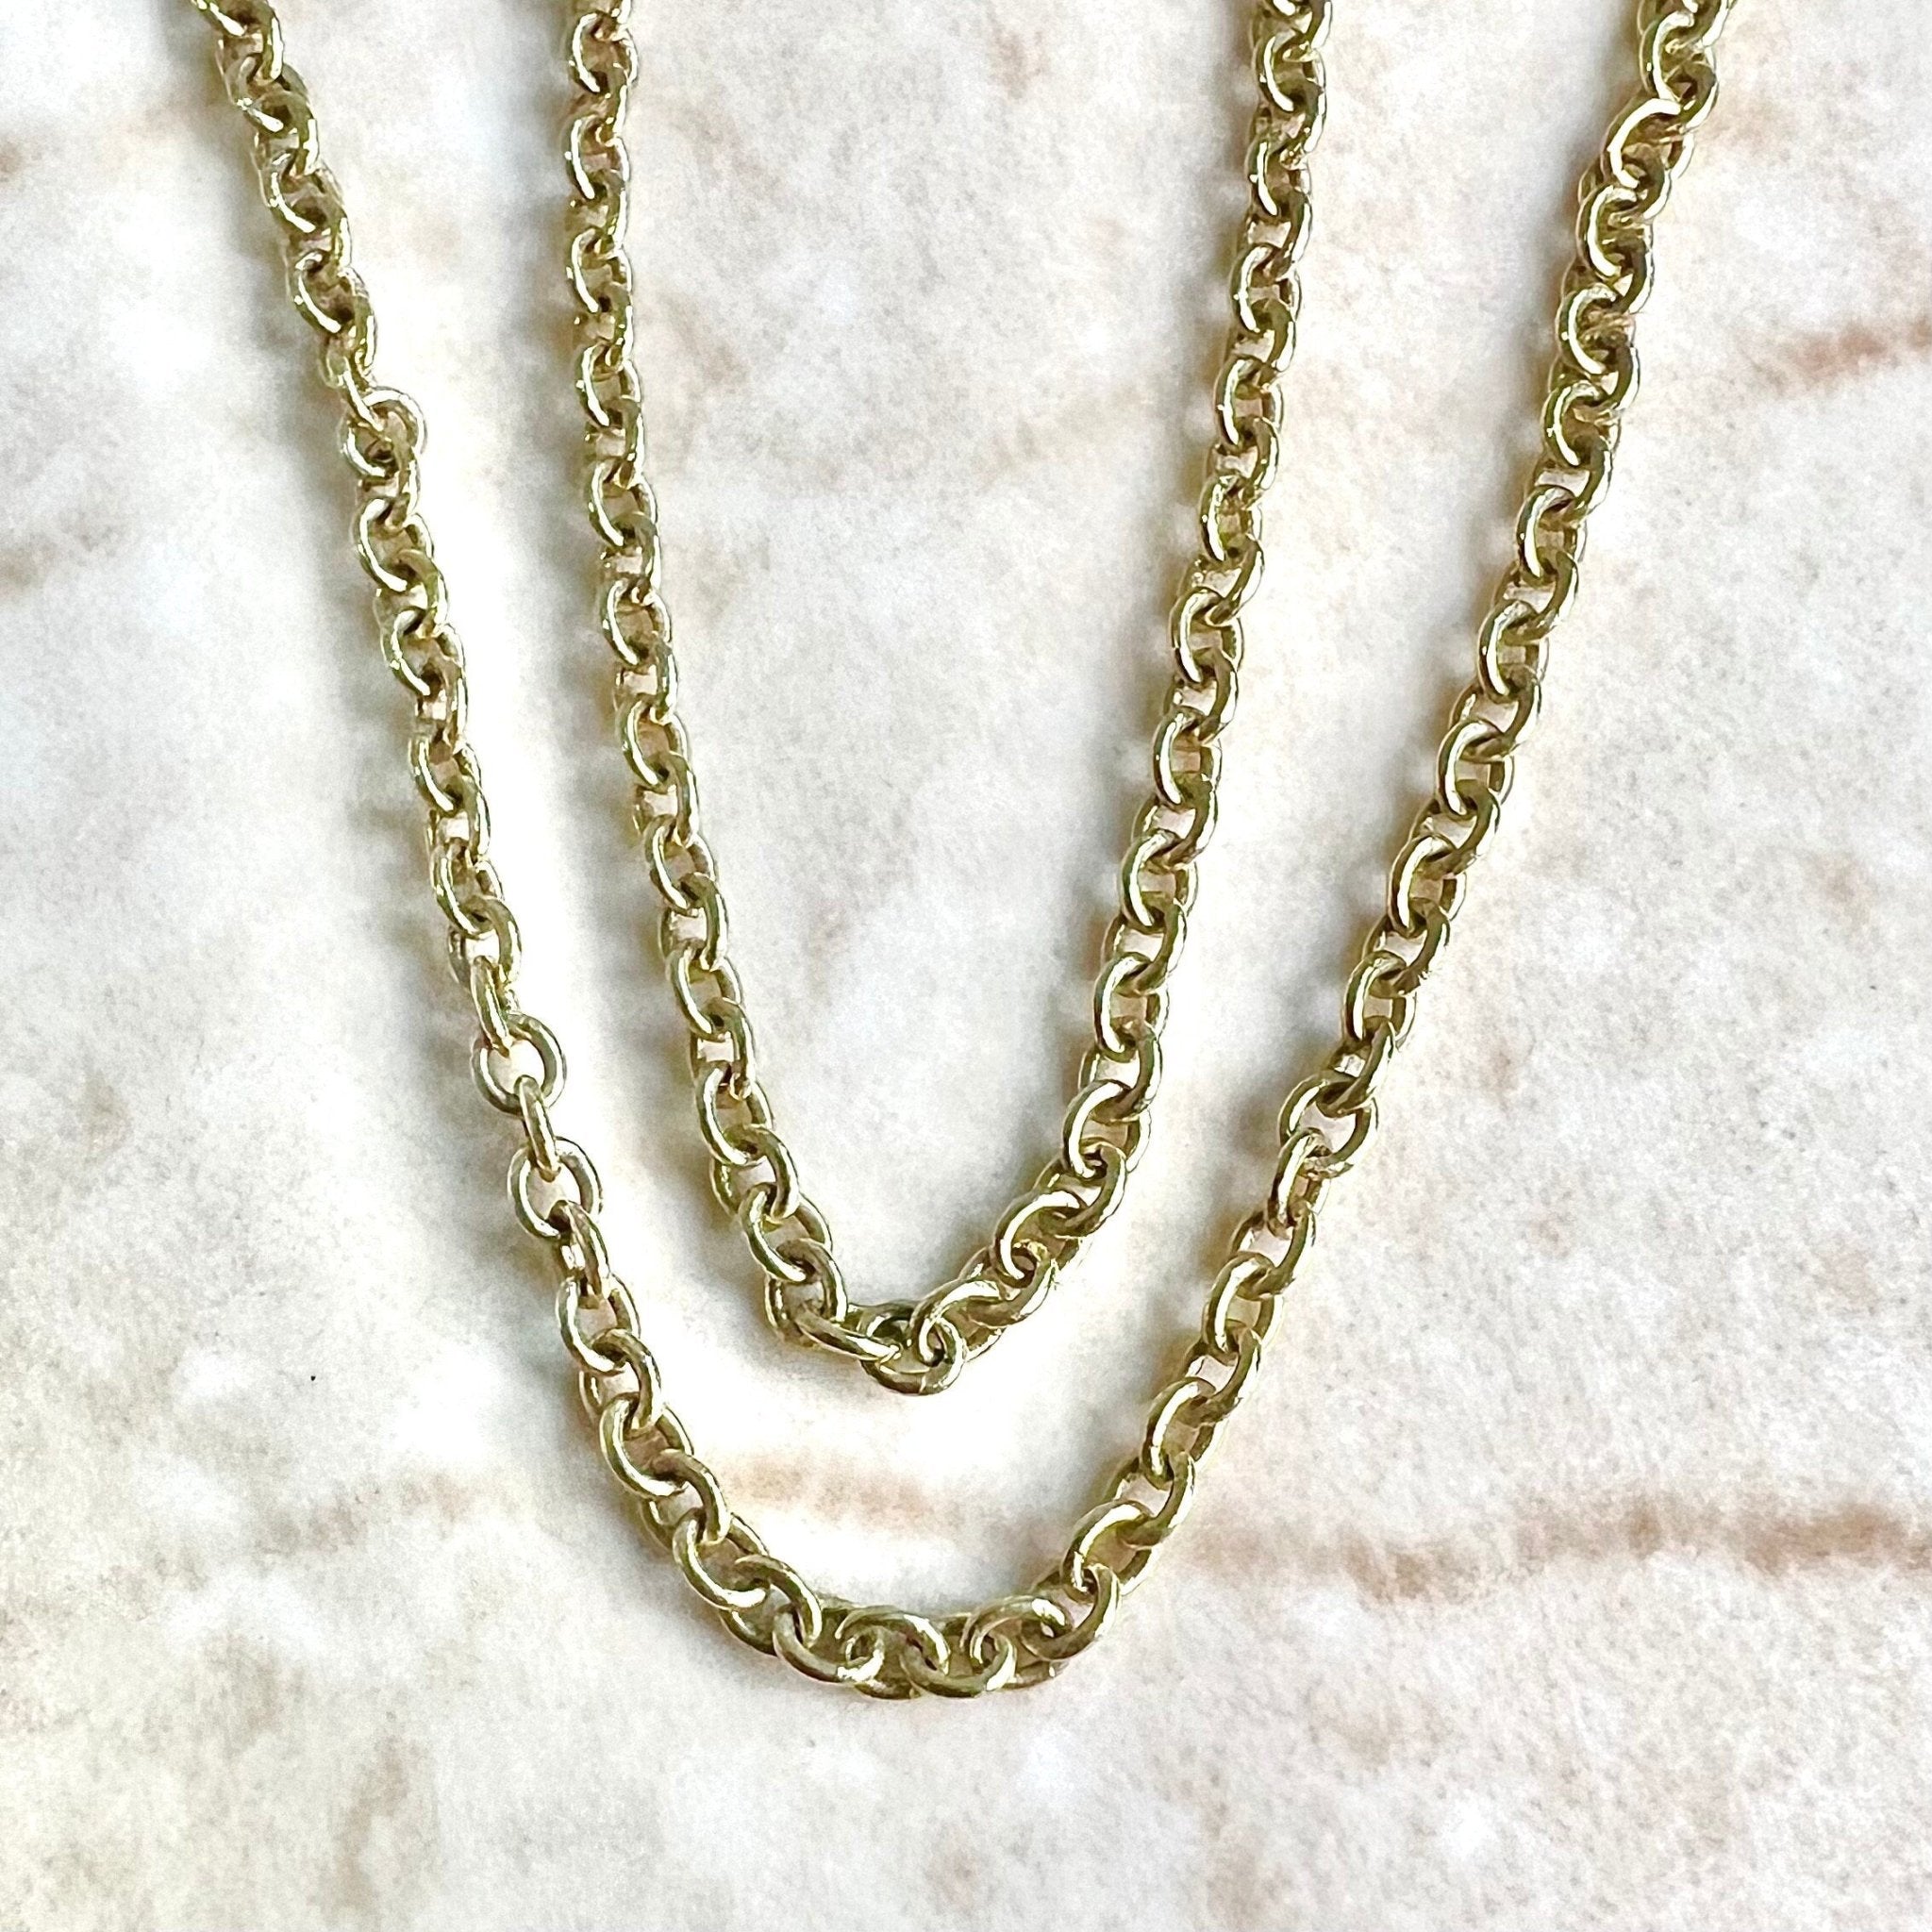 Buy 1.0mm 14K Solid Yellow Gold Chain Necklace Box Chain With Lobster Lock  16 24 Online in India - Etsy